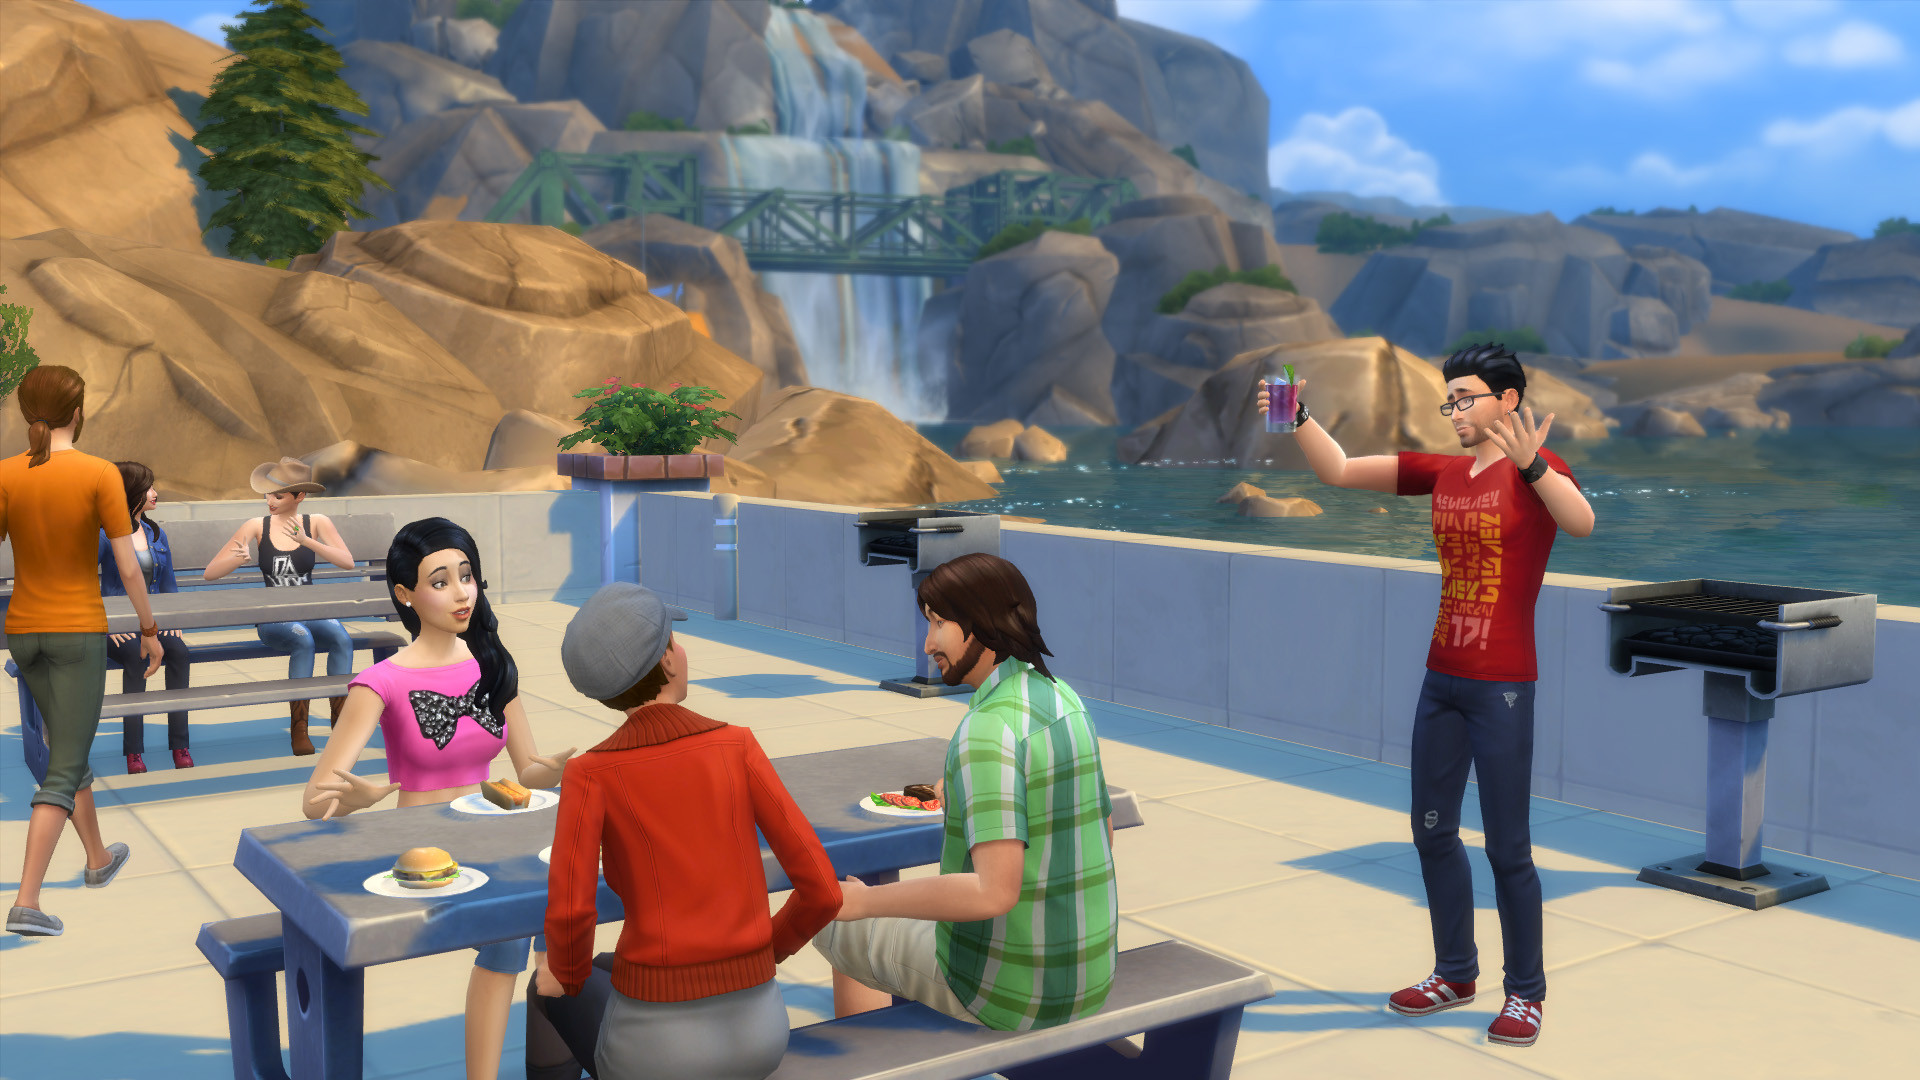 gamesradar-8-things-we-learned-about-the-sims-4-simsvip